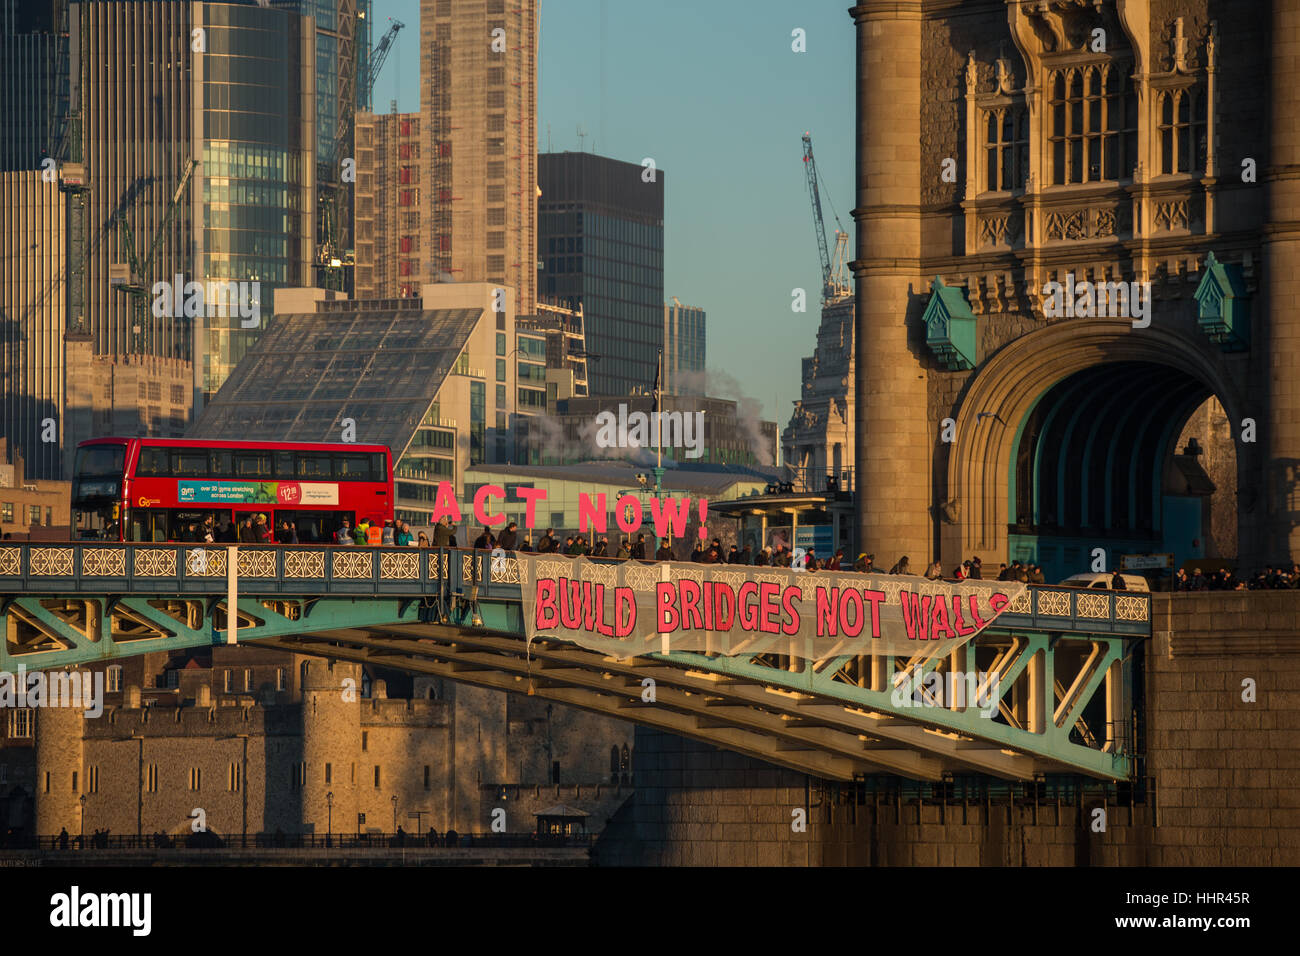 London, UK. 20 January, 2017. On the eve of Donald Trumps inauguration as the 45th President of the United States of America, and in defiance of his politics of hate and division, ’Bridges not walls’ dropped banners from many bridges around the World including the iconic Tower Bridge in London. David Rowe/Alamy Live News Stock Photo